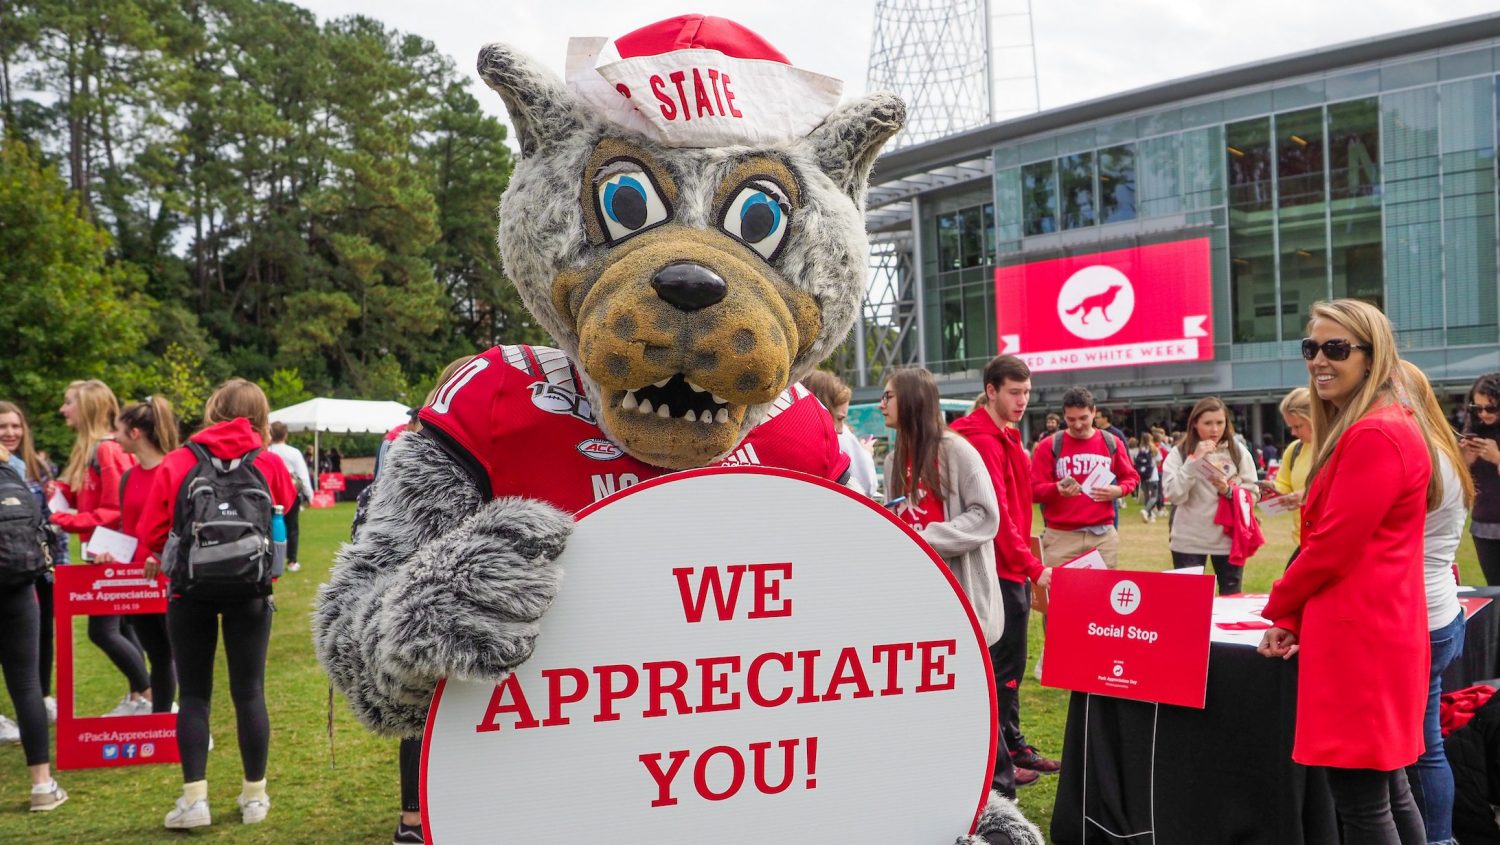 Mr Wuf holding up We Appreciate You sign during Pack Appreciation Day